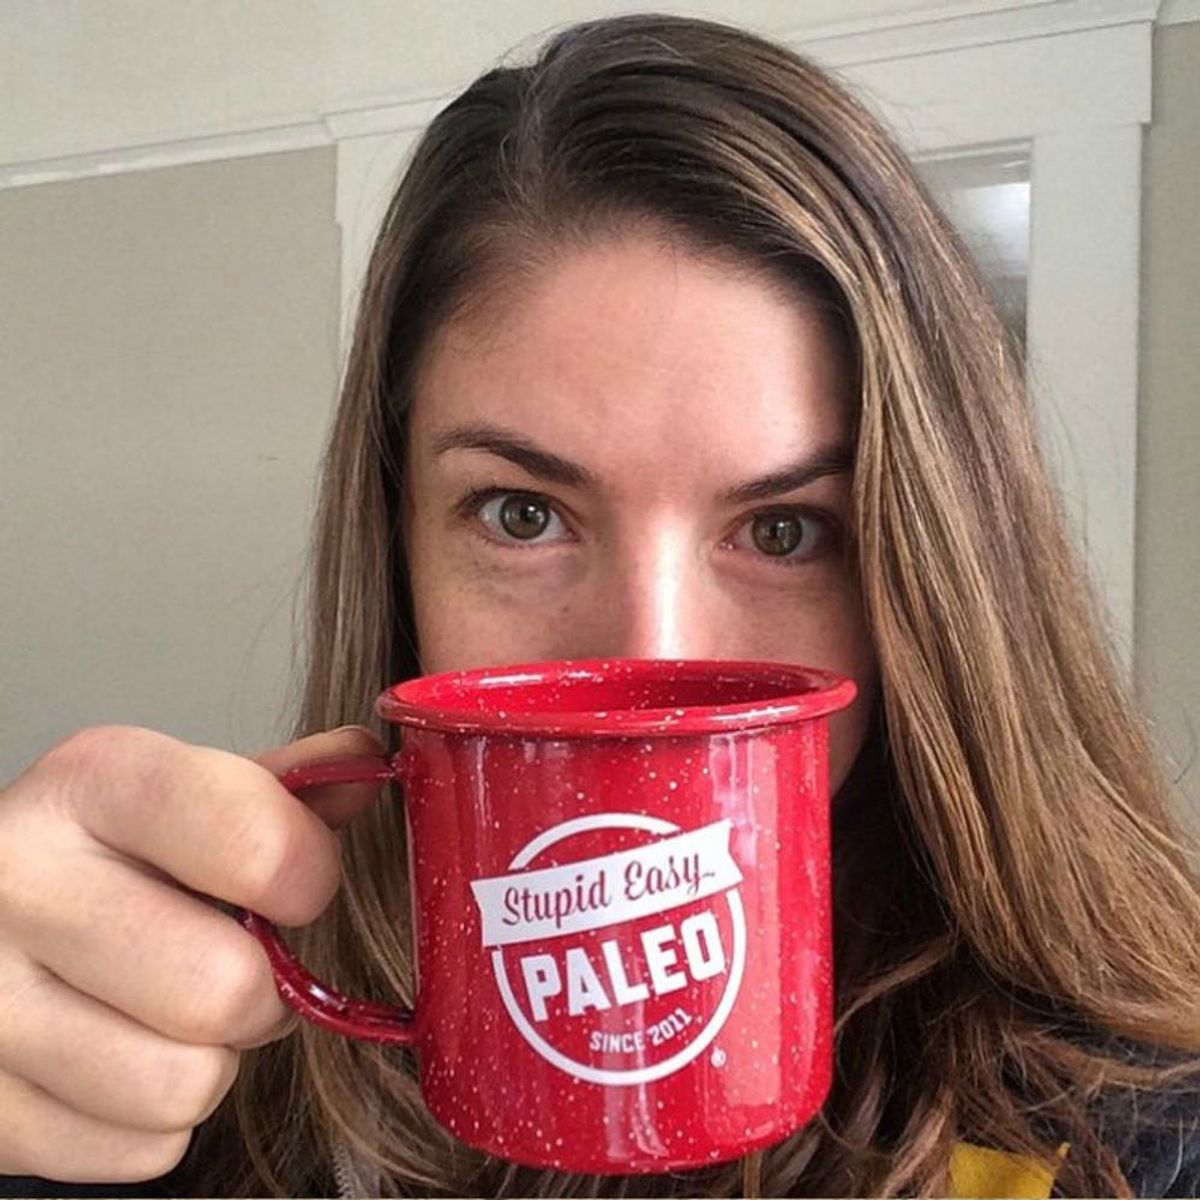 This Woman Is Here to Show You How Stupid Easy It Is to Go Paleo